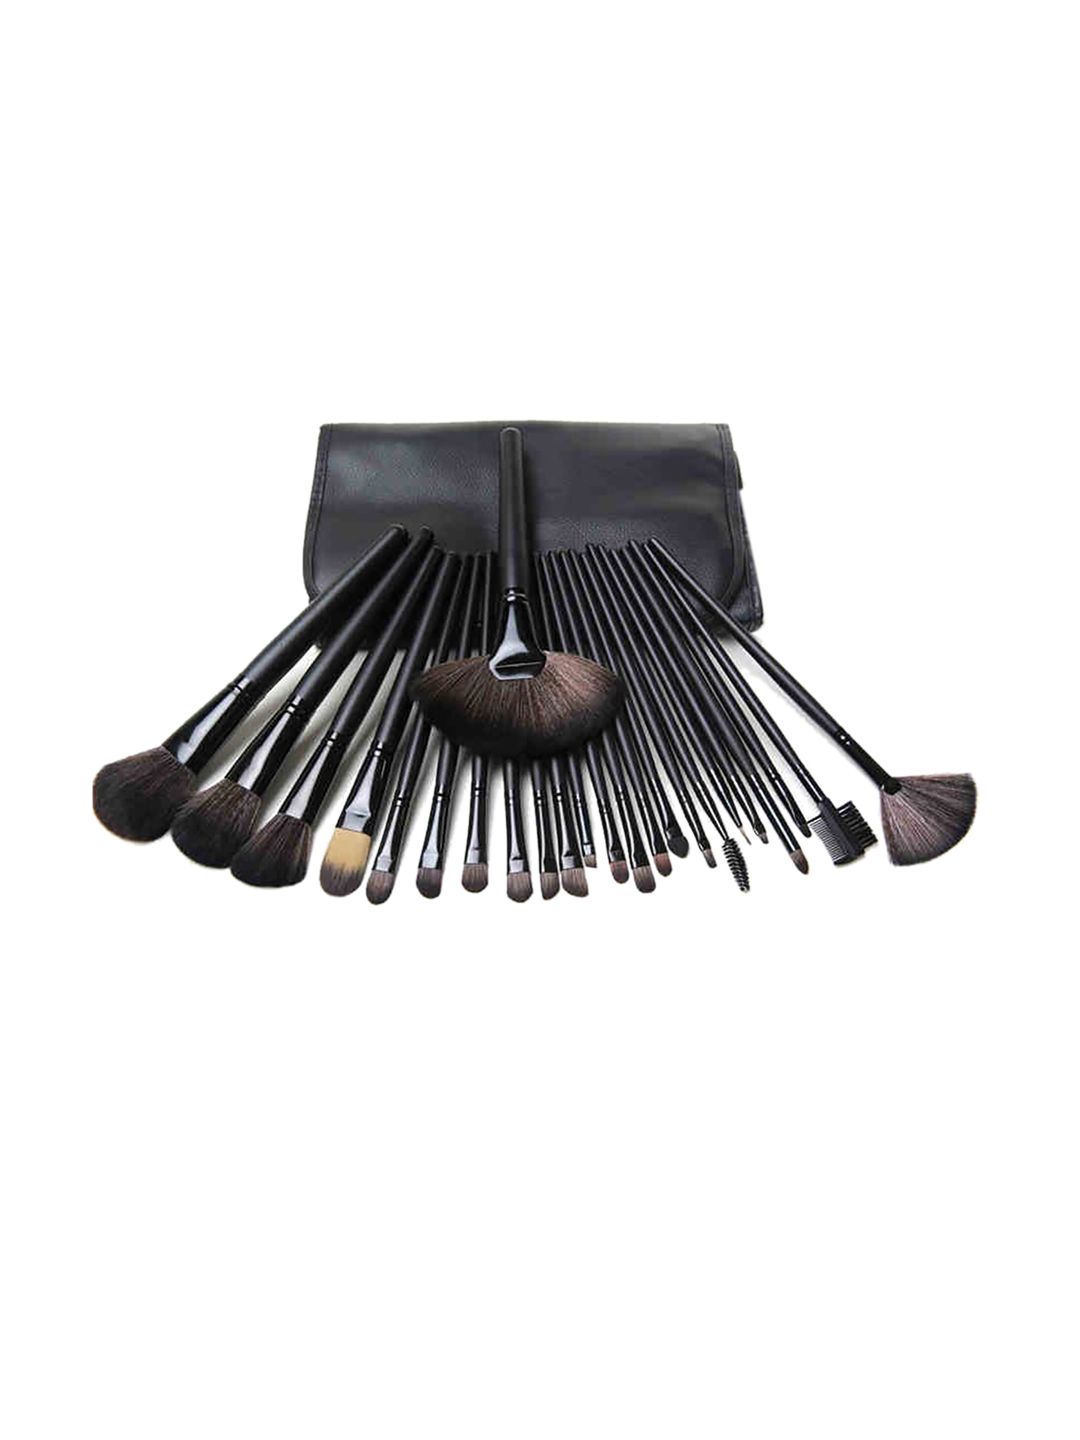 Ronzille Set of 24 Black Makeup Brushes Price in India